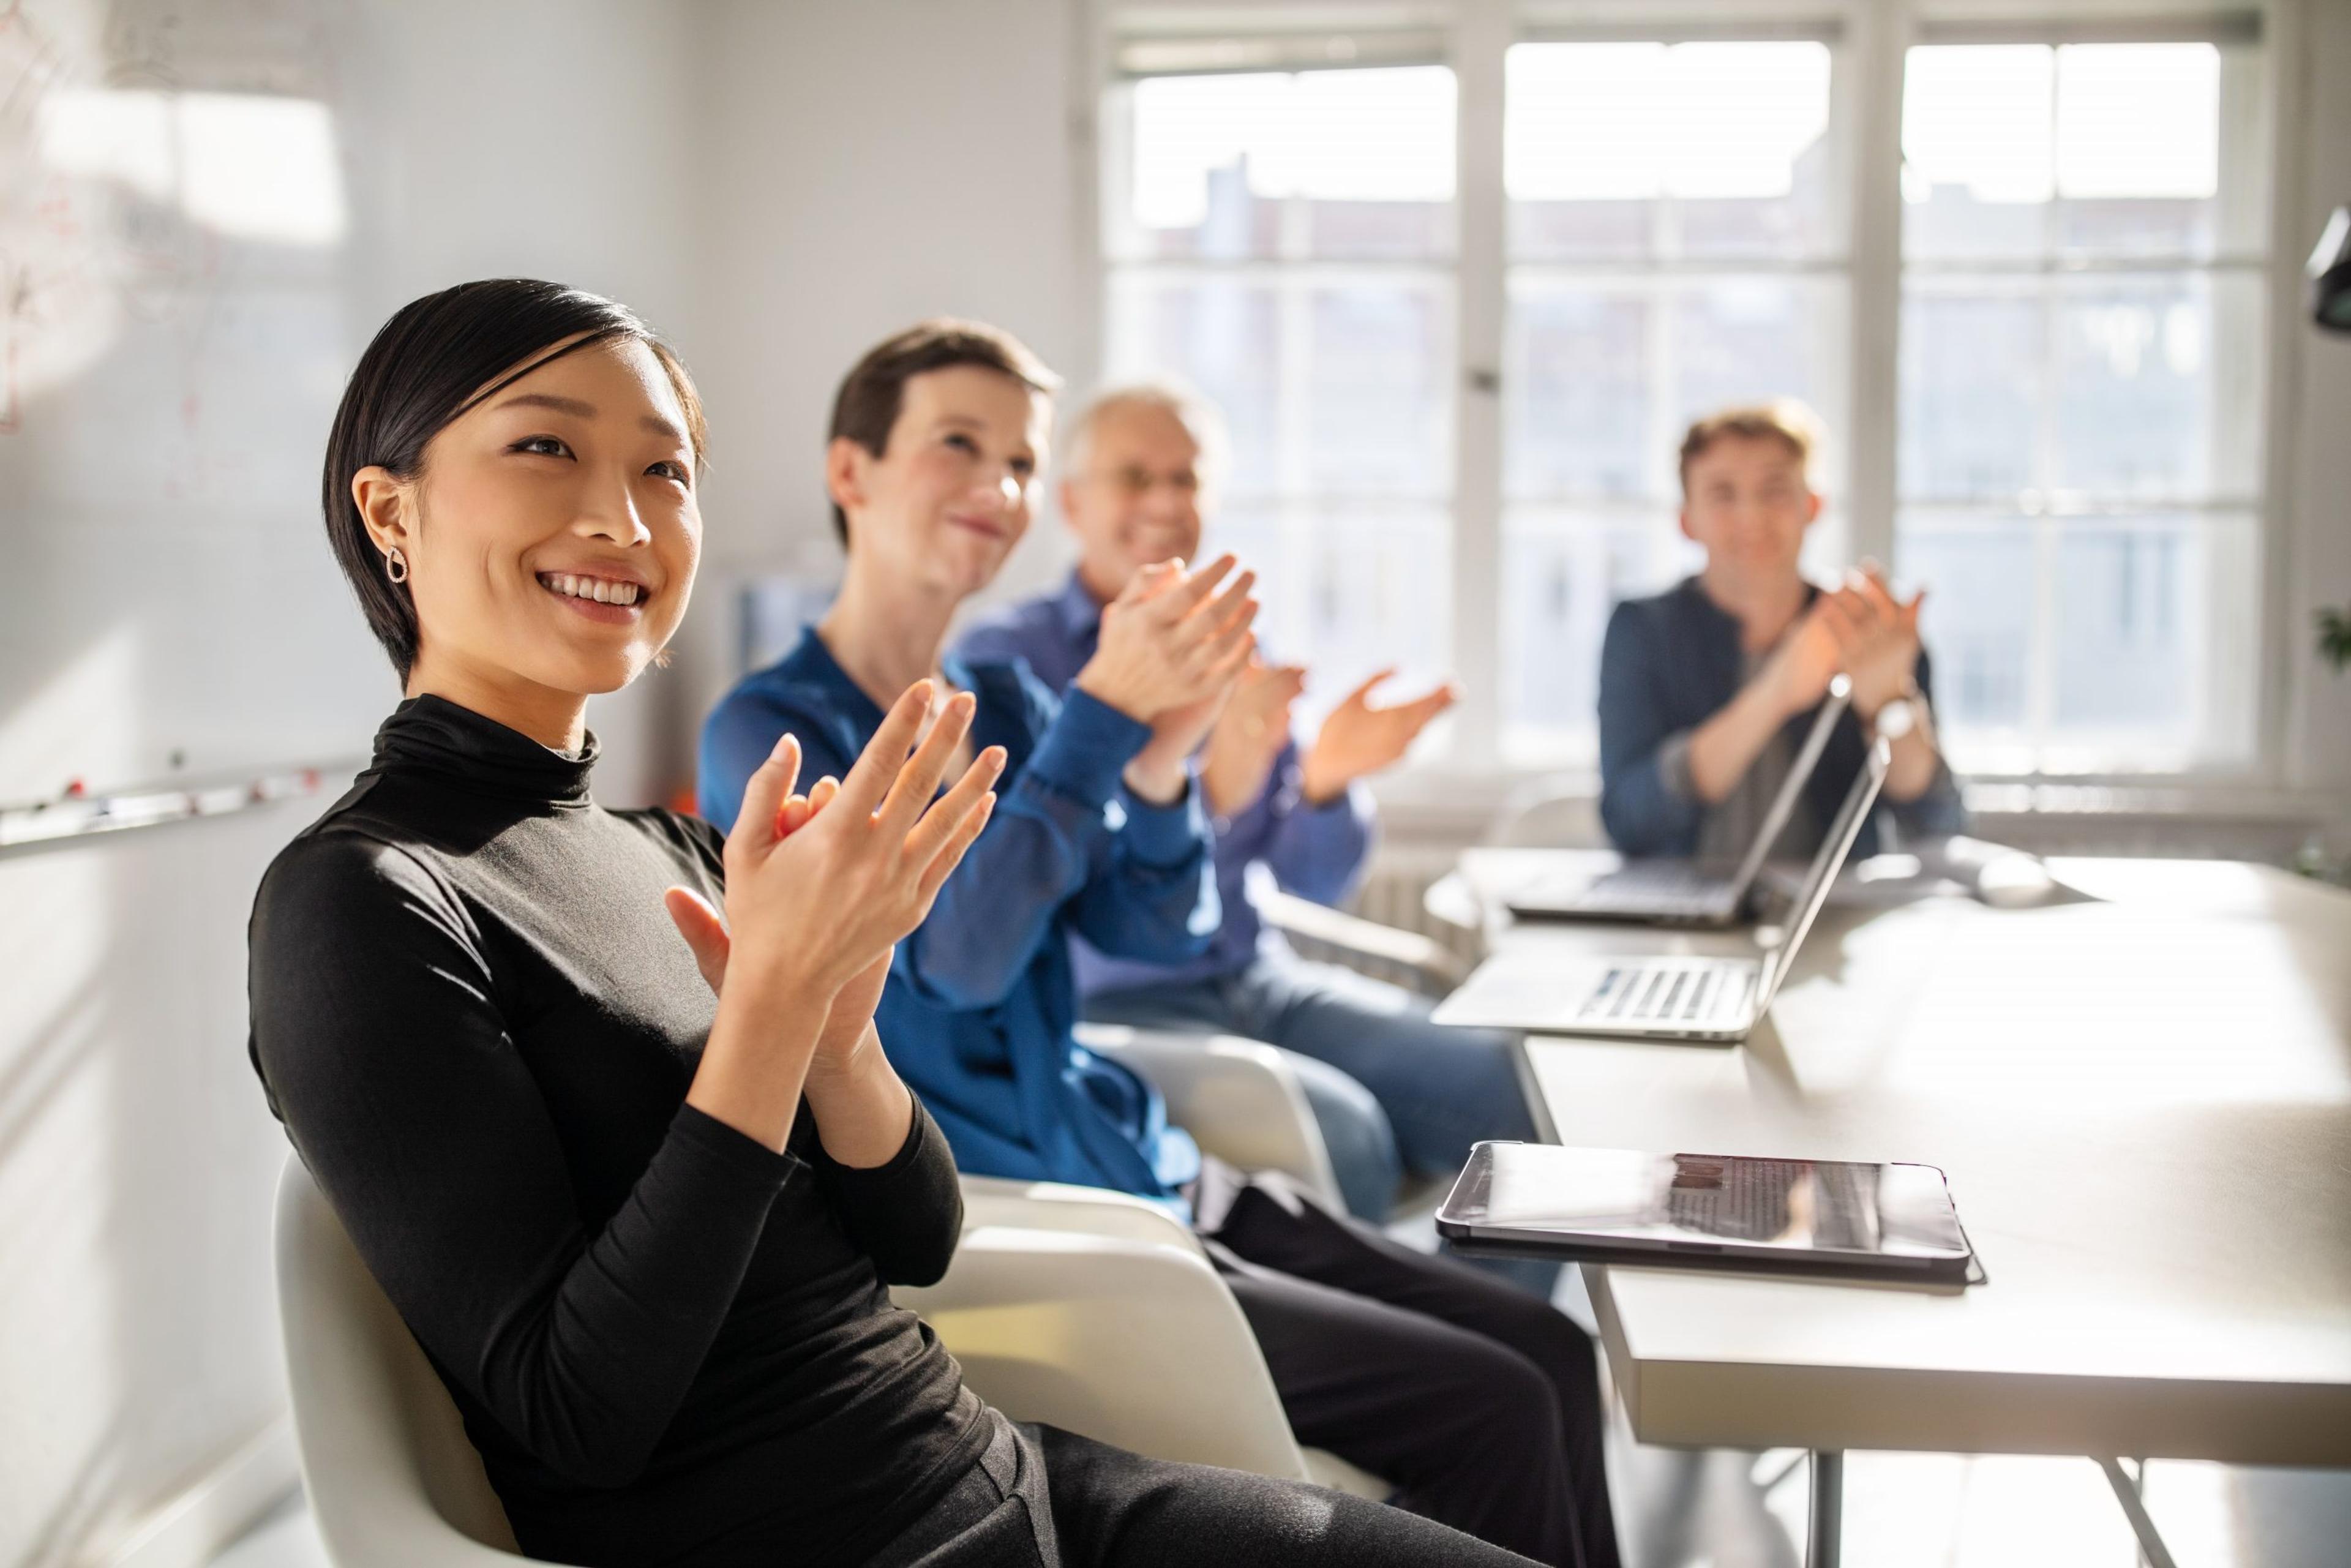 Business professionals clapping hands in a meeting